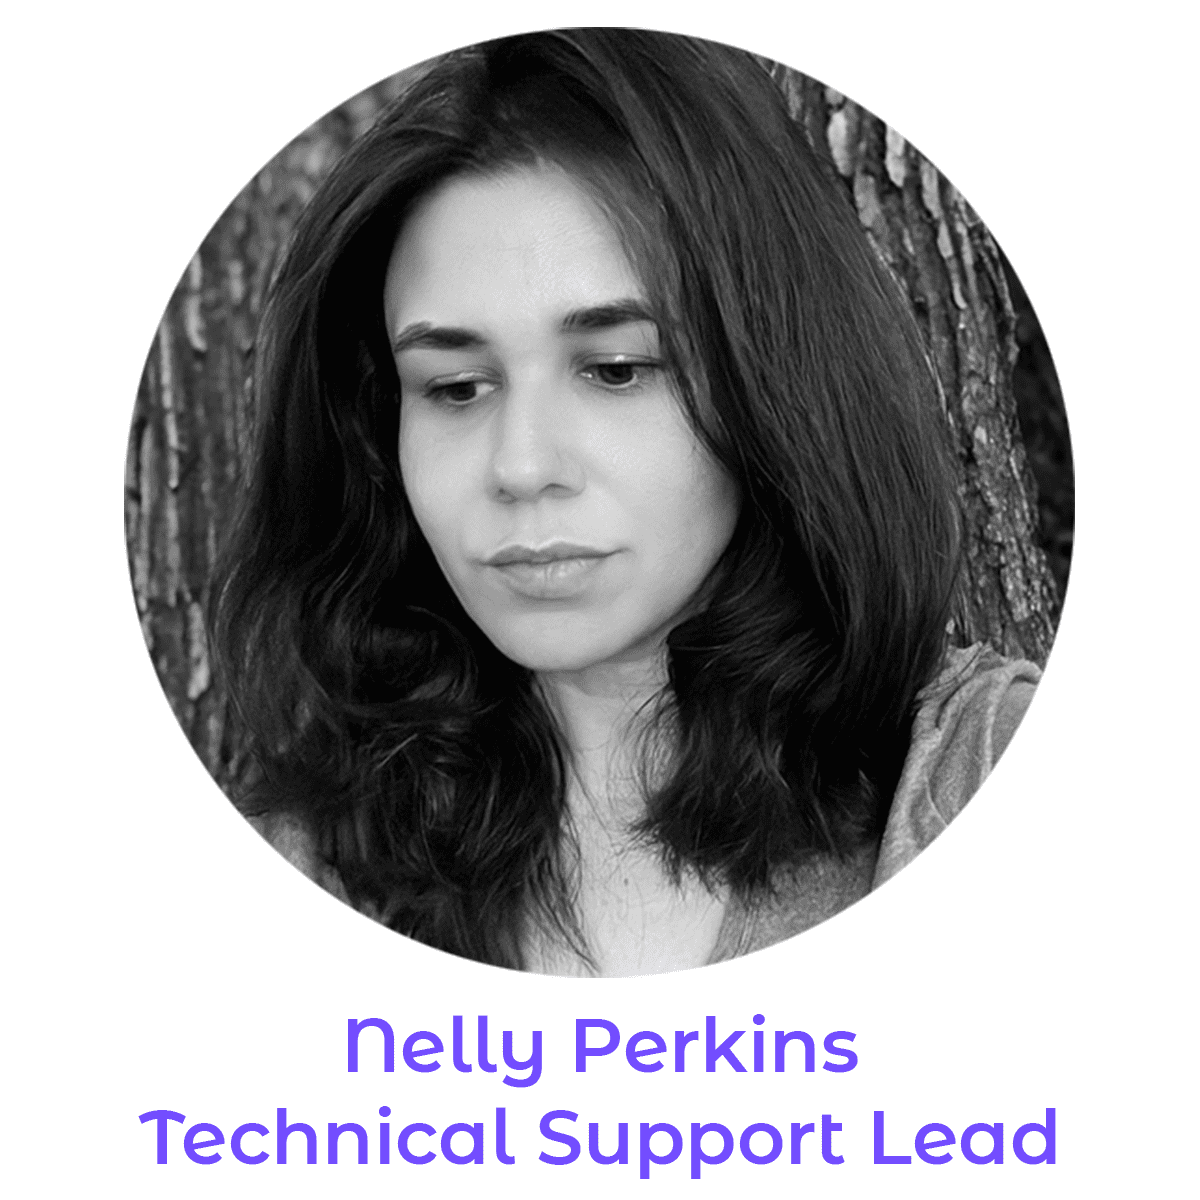 Nelly Perkins, Technical Support Lead